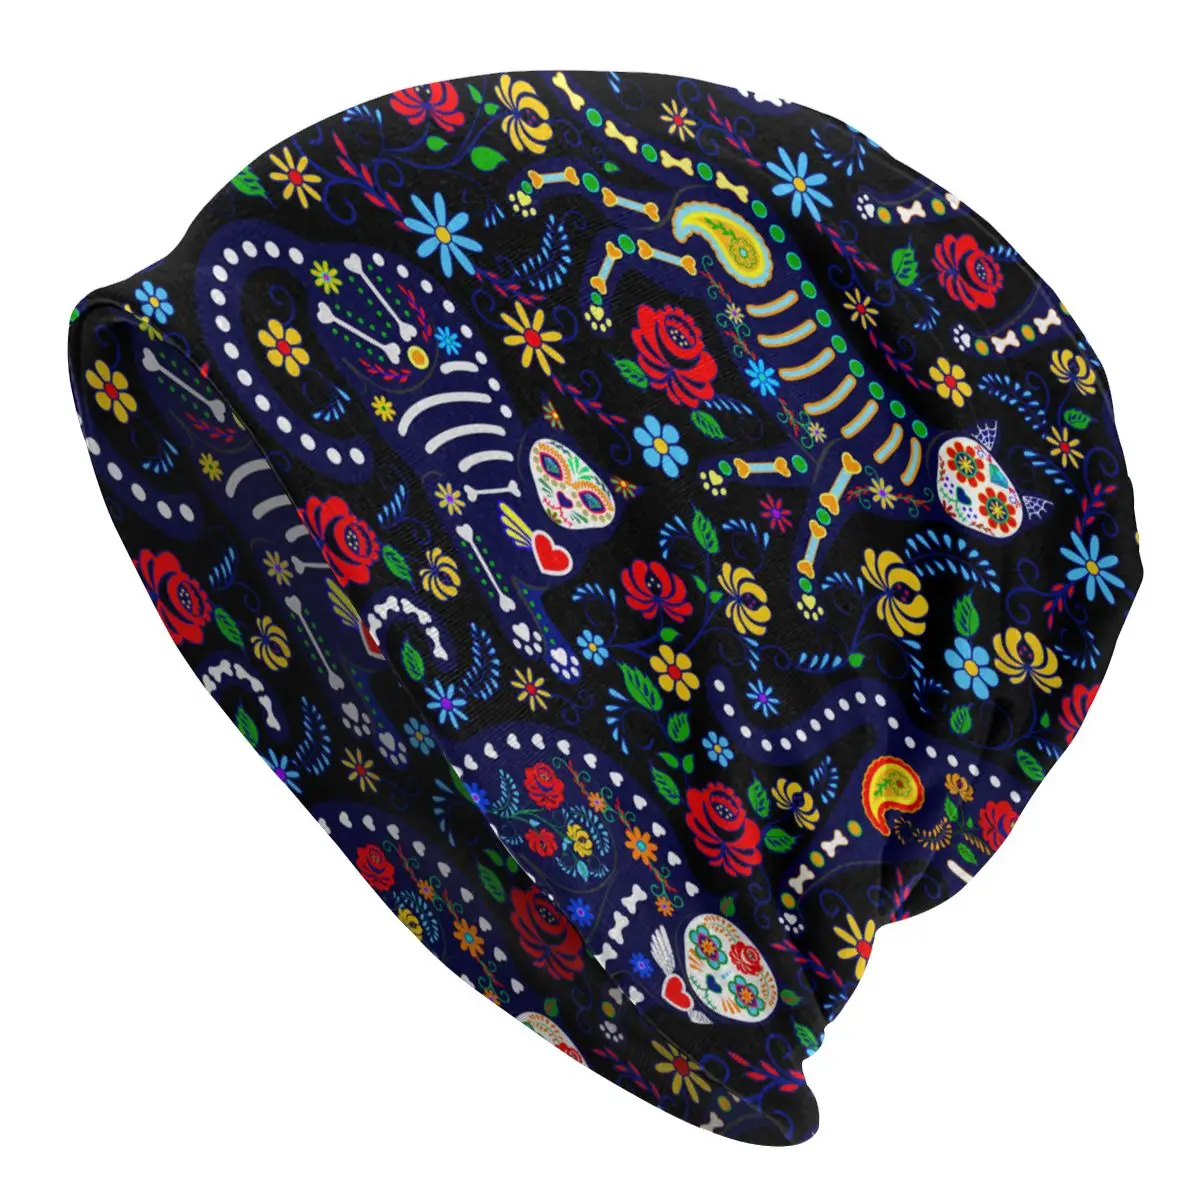 Calavera Cats And Sugar Skulls For Day Of The Dead Men's Beanies for Women Outdoor Bonnet Hats Unisex Knitted Hat Hip Hop Cap